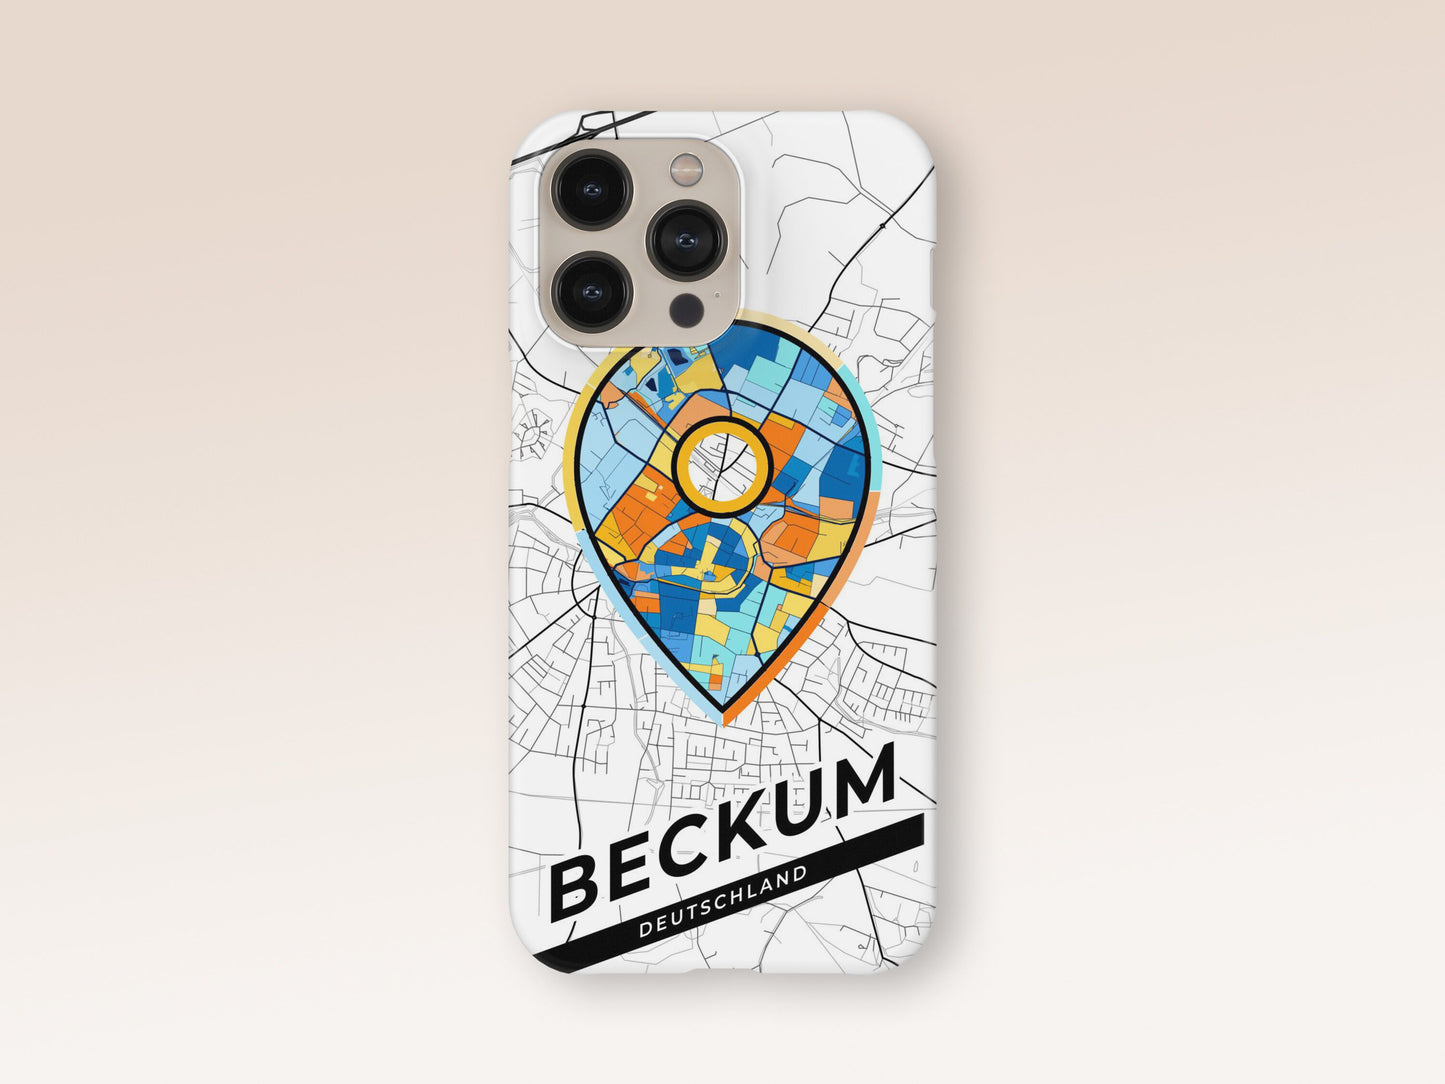 Beckum Deutschland slim phone case with colorful icon. Birthday, wedding or housewarming gift. Couple match cases. 1